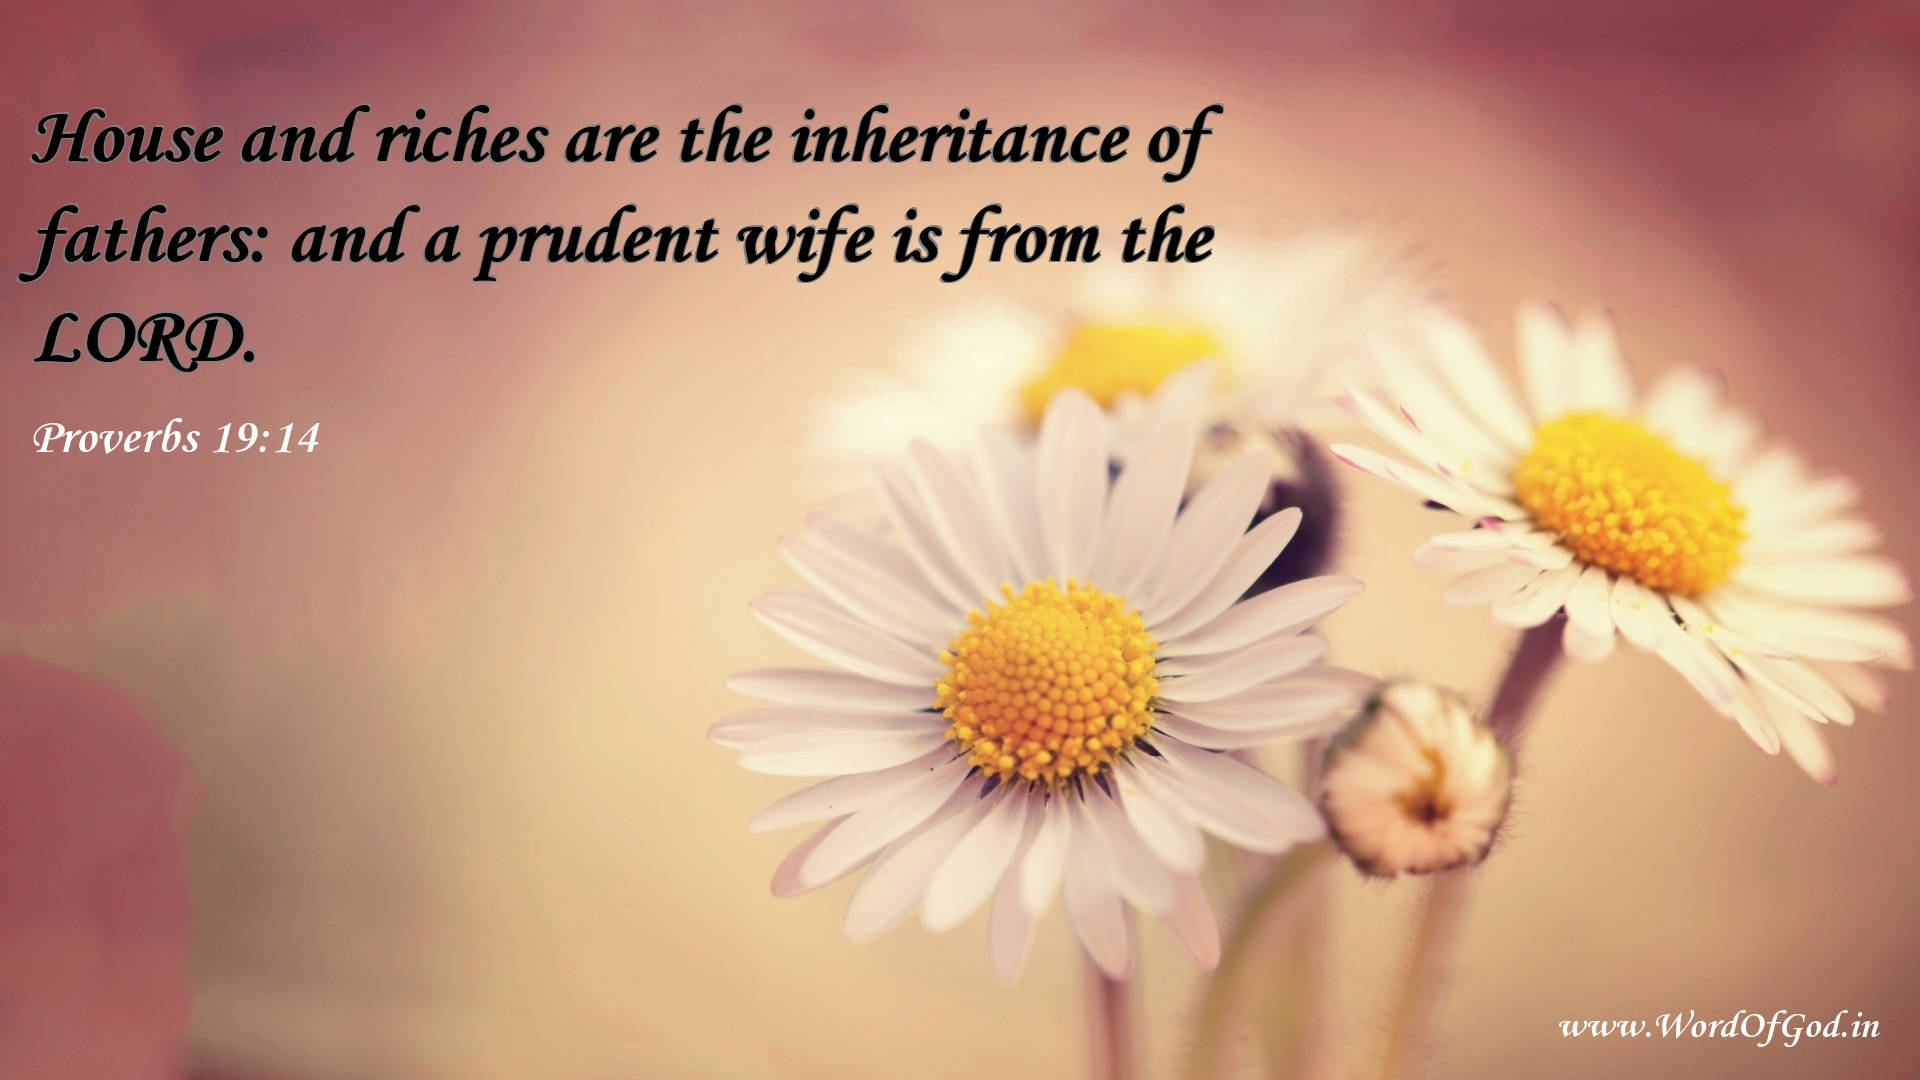 A Representation Of Prudence And Wisdom Wallpaper